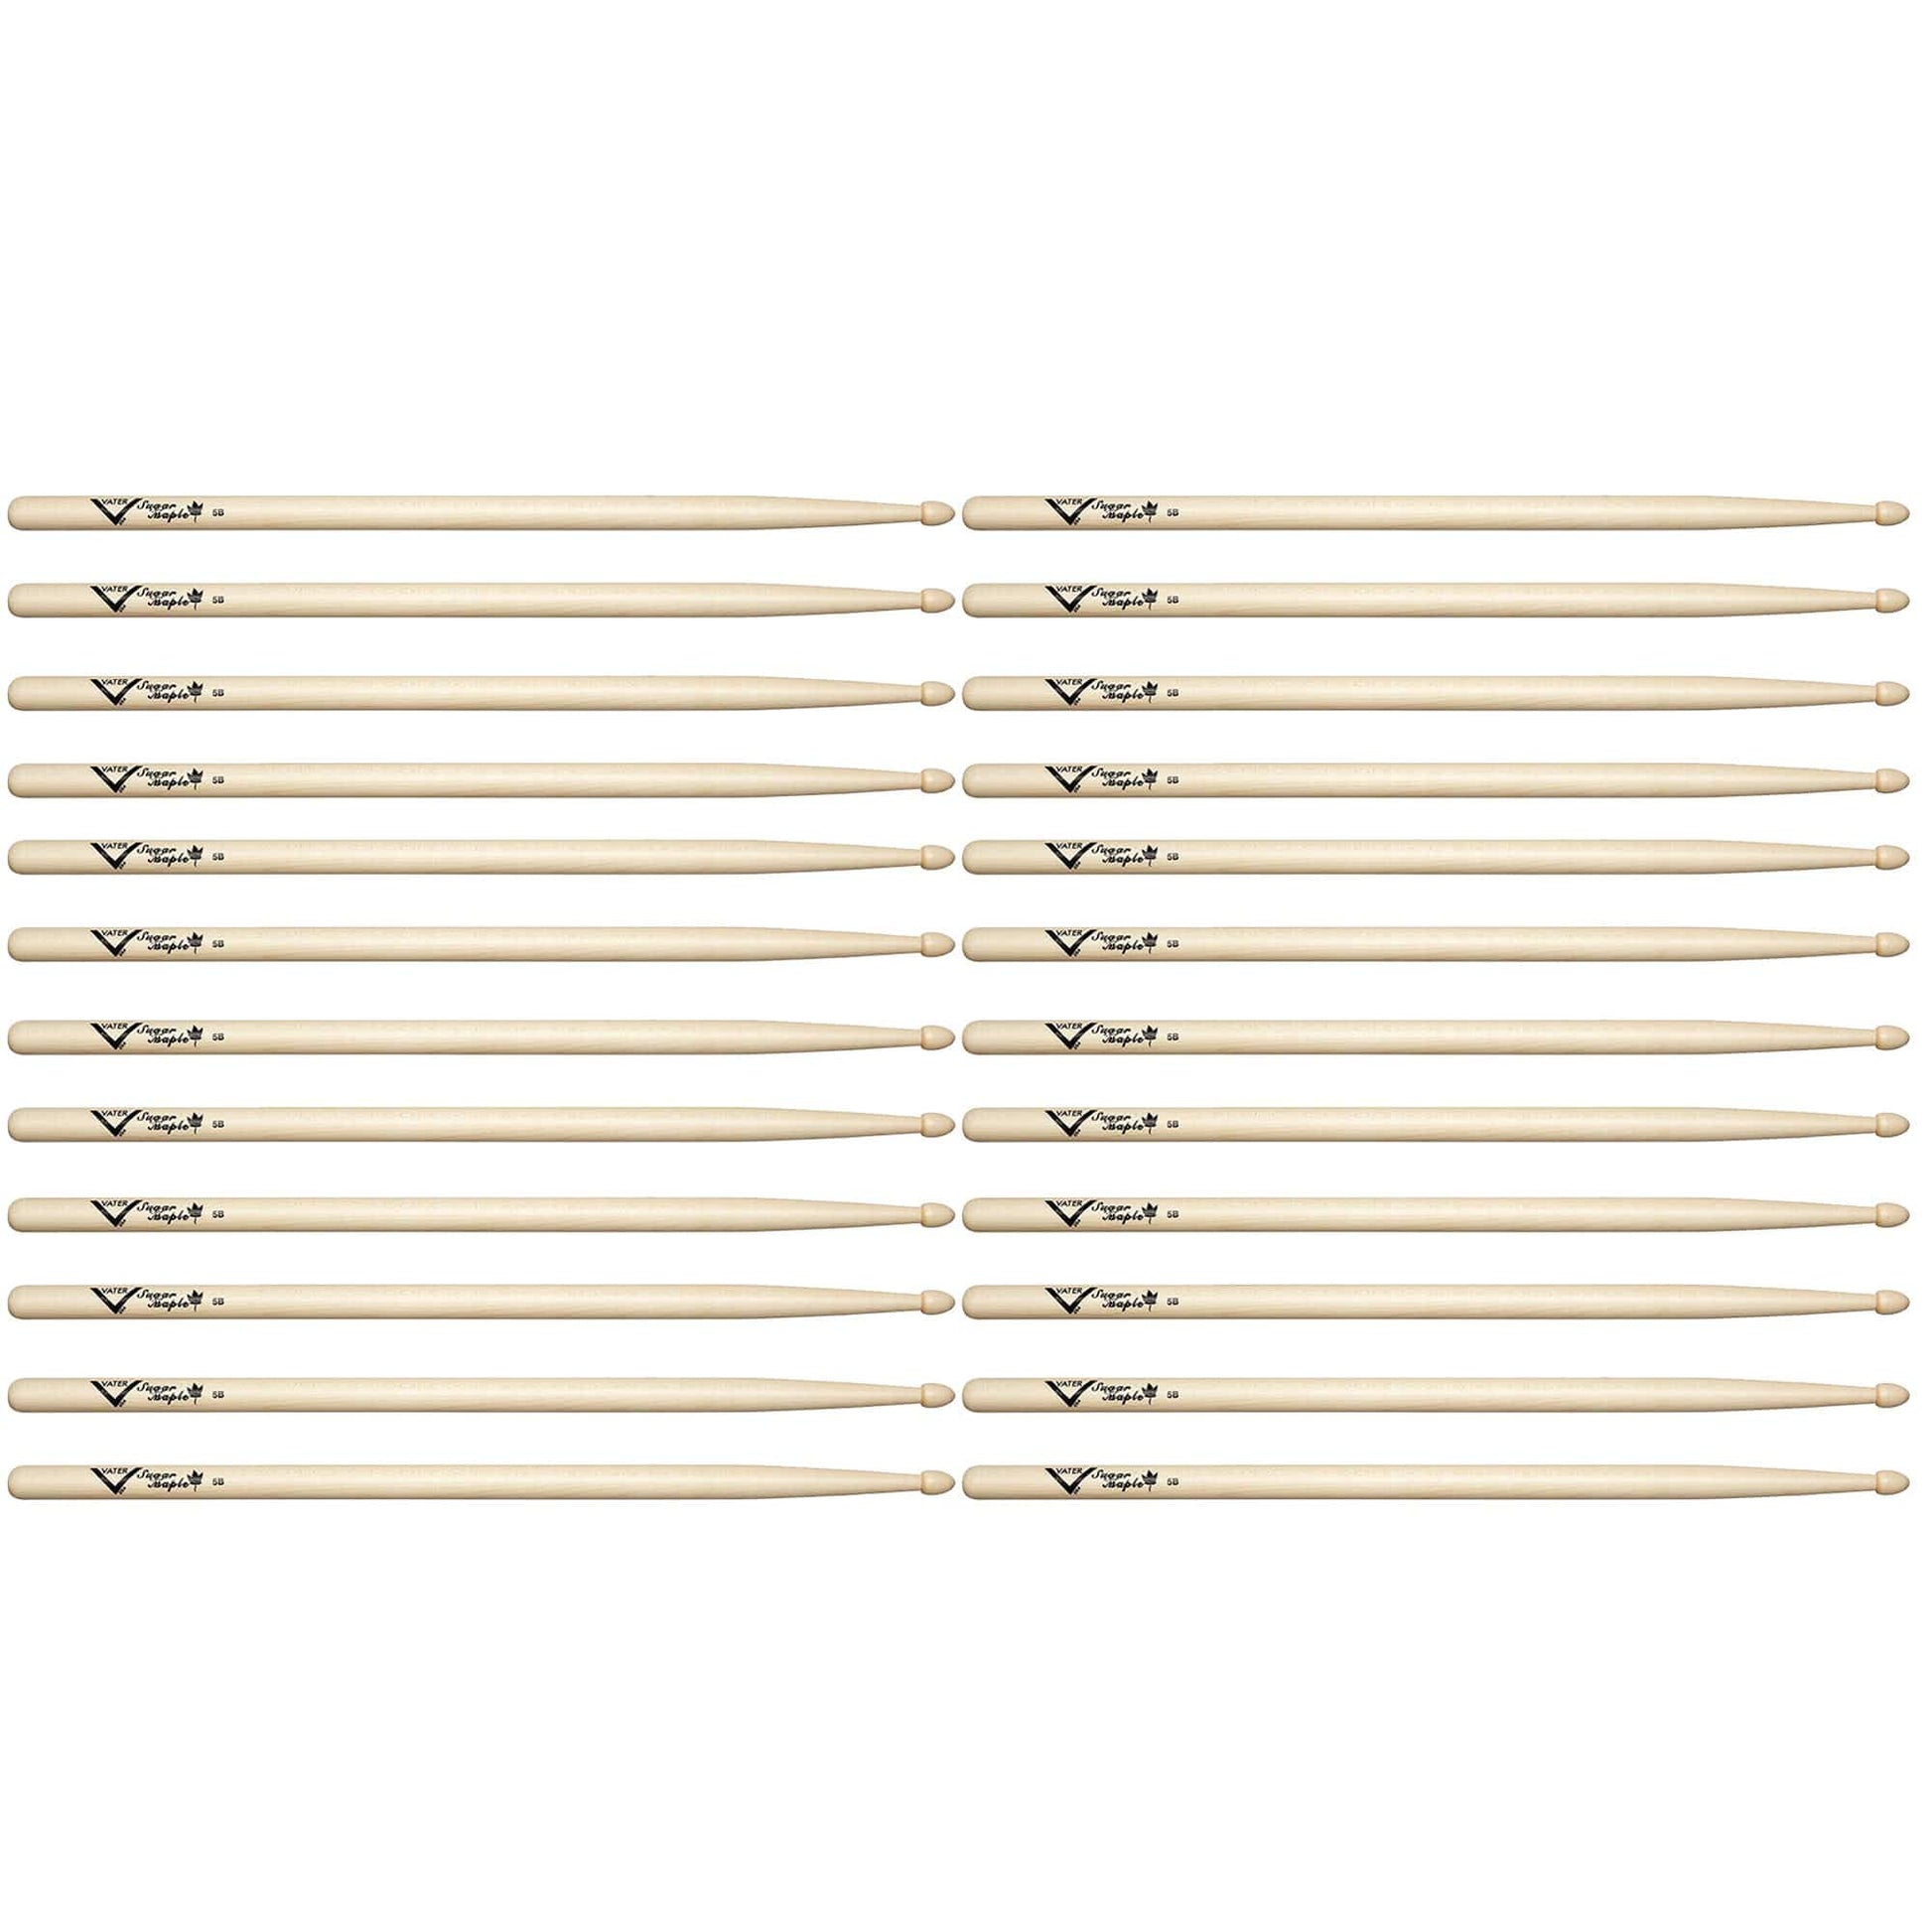 Vater Sugar Maple 5B Wood Tip Drum Sticks (12 Pair Bundle) Drums and Percussion / Parts and Accessories / Drum Sticks and Mallets